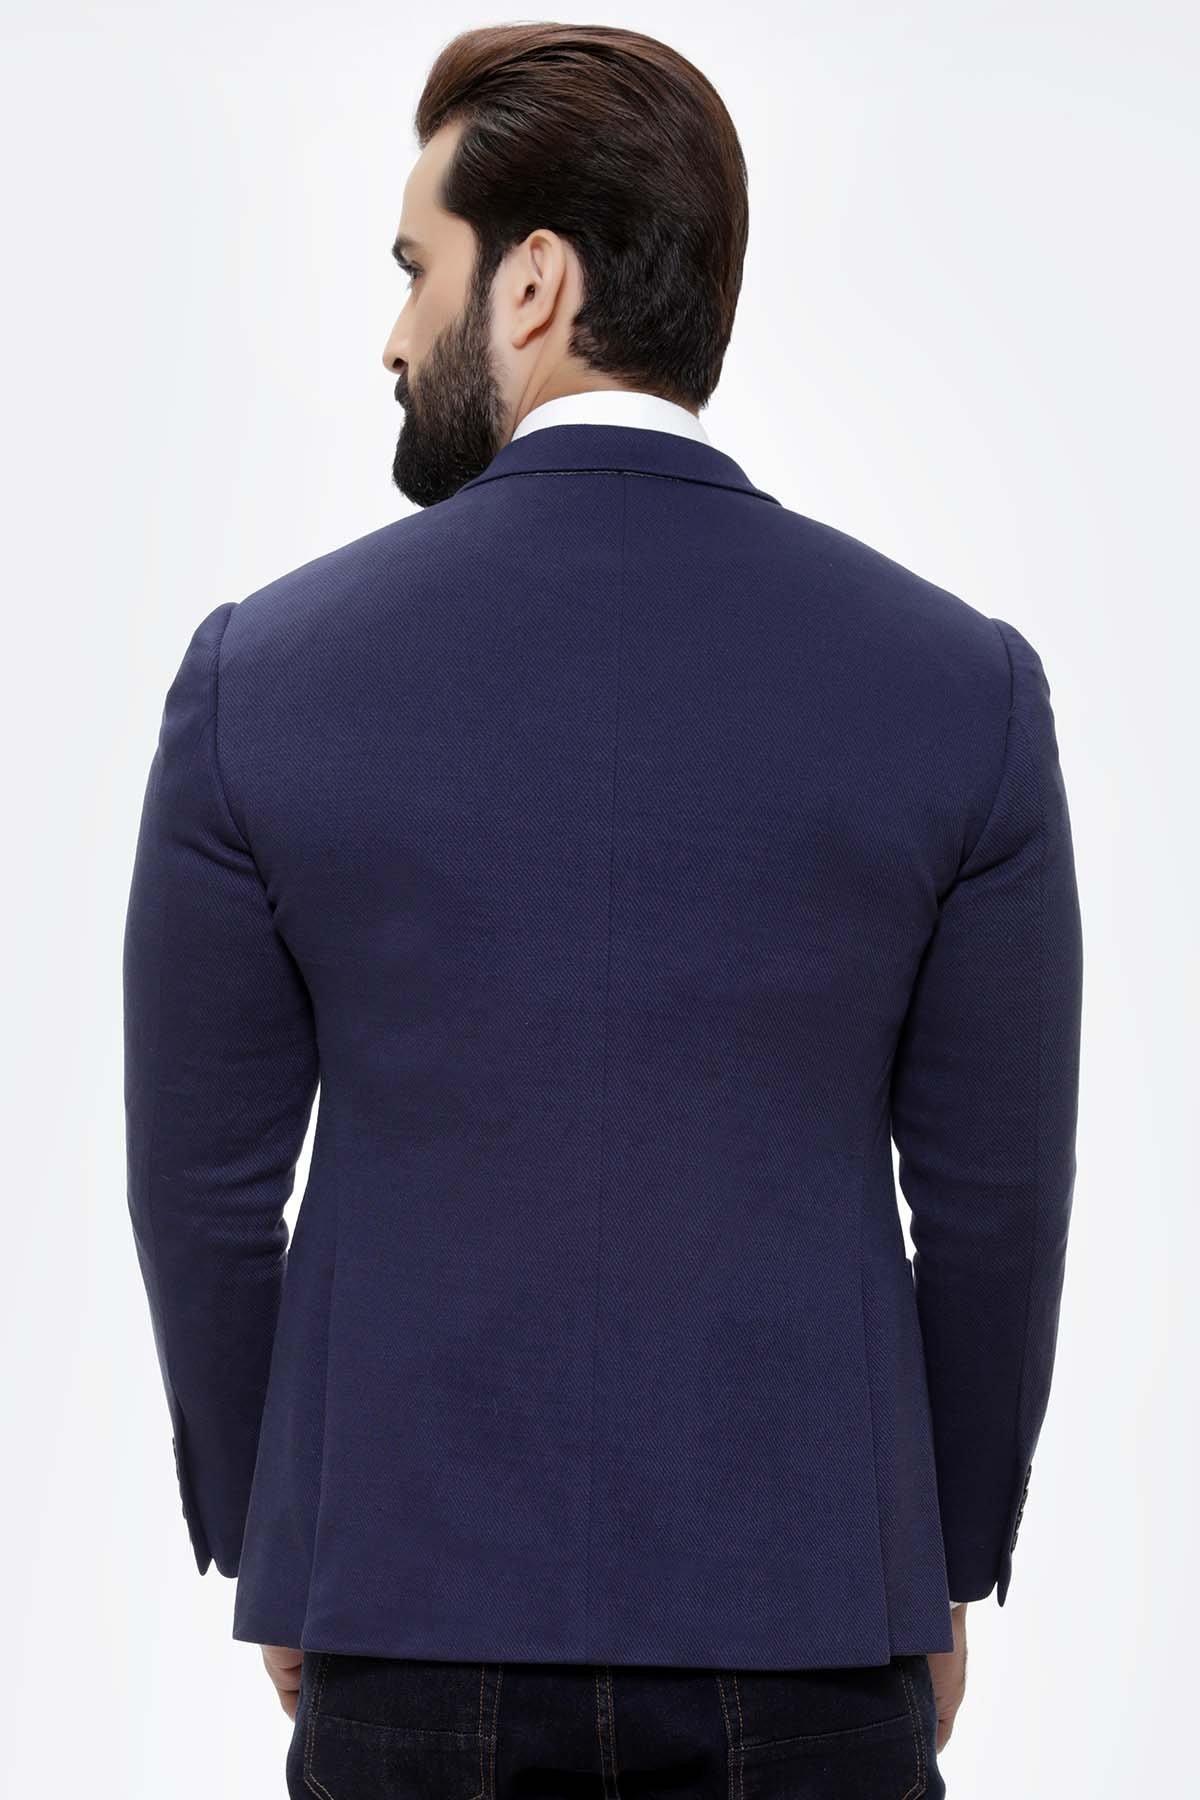 CASUAL COAT 2 BUTTON SLIM FIT NAVY at Charcoal Clothing